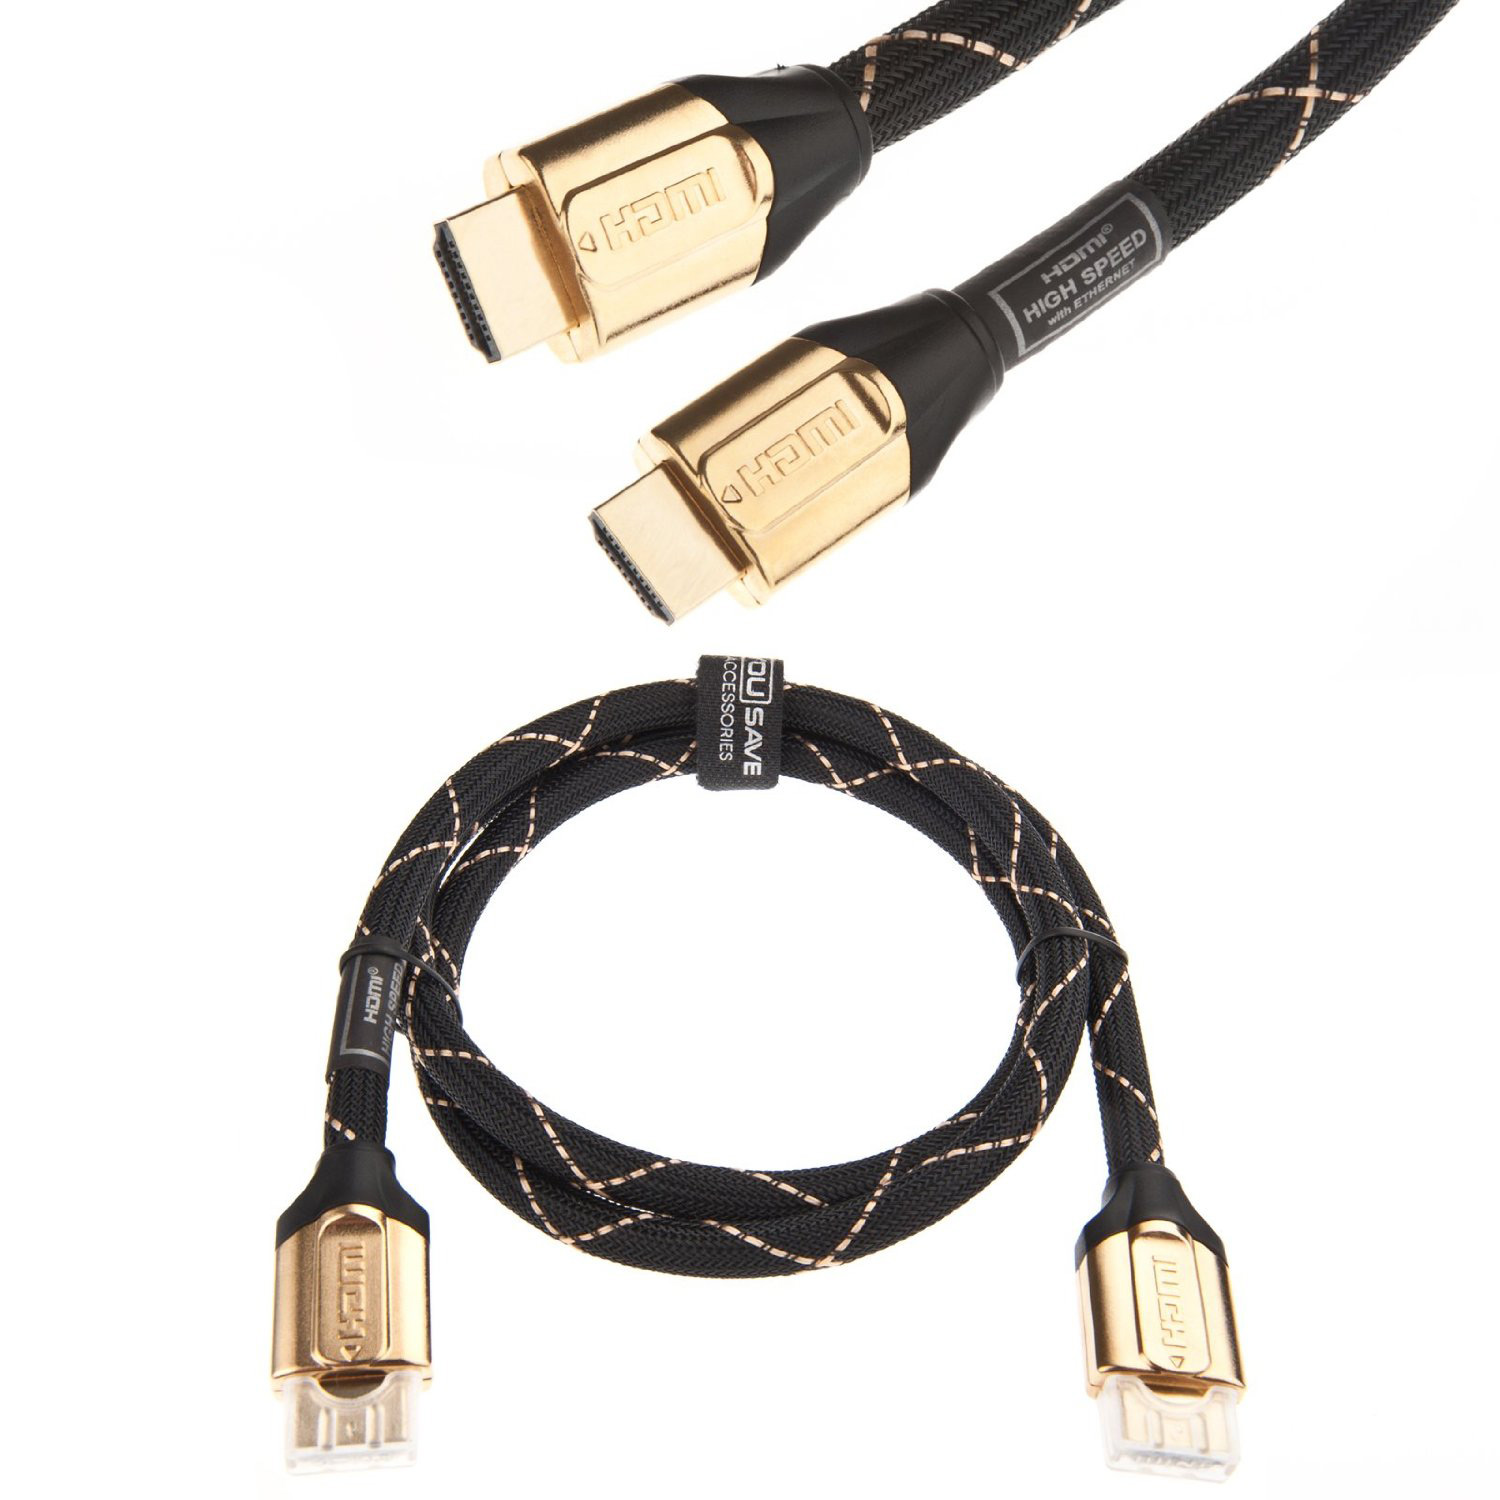 YouSave Accessories Accessories High Speed HDMI Cable Edition 5m